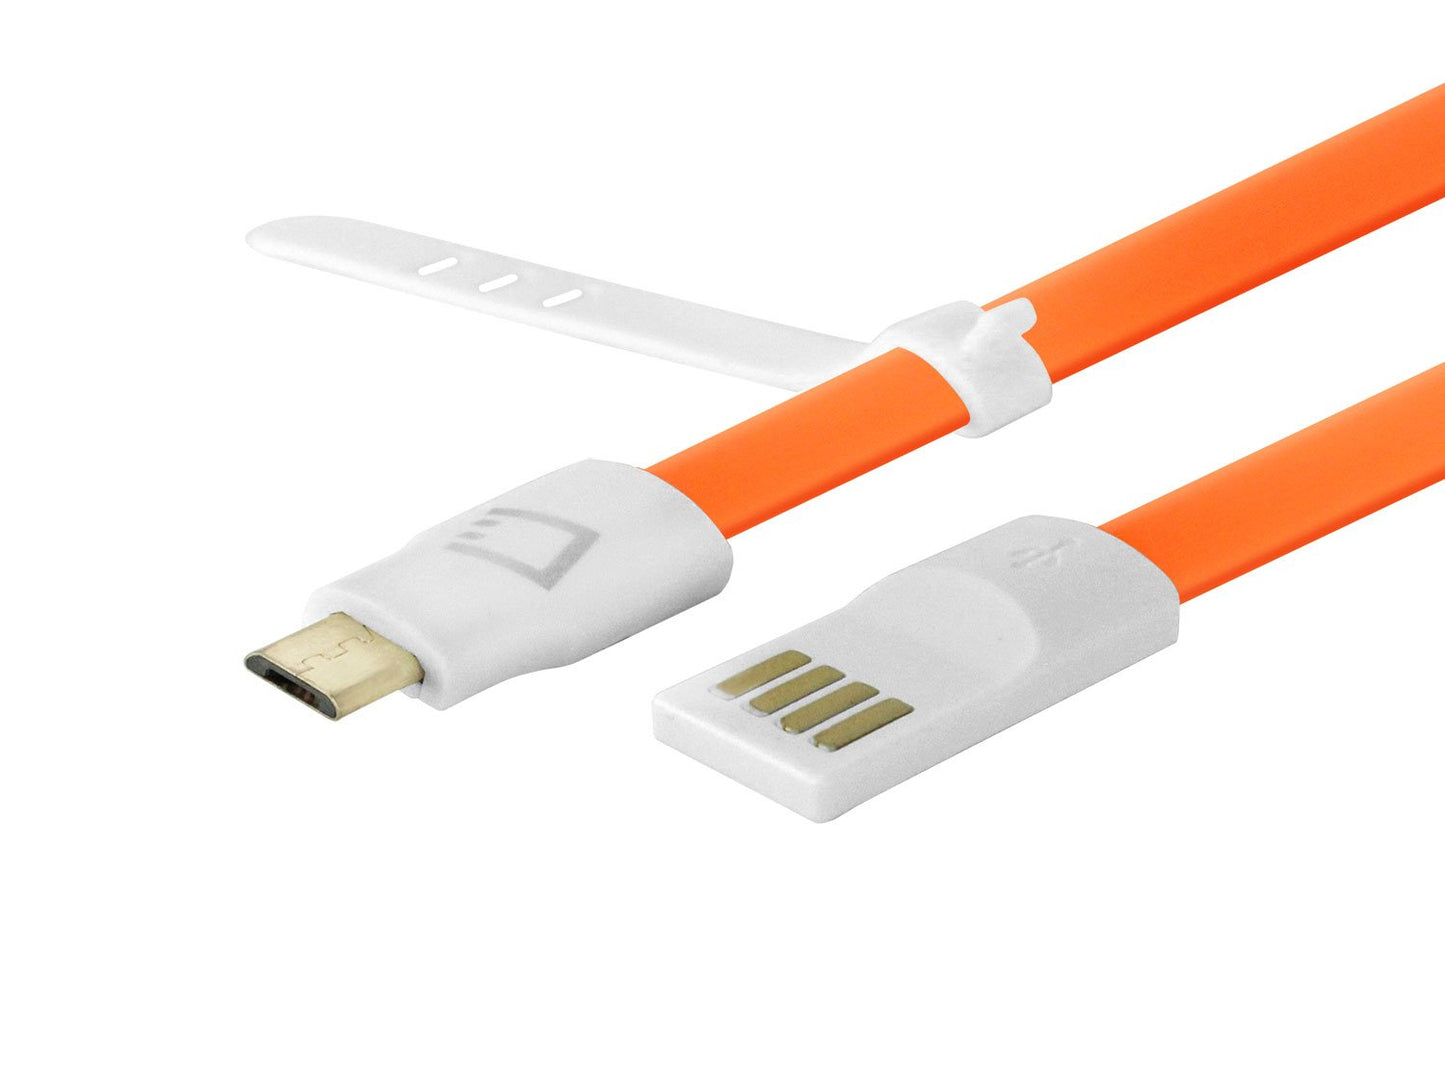 DAMICROGOR - Cellet 3 Ft. Flat Wire Micro USB Charging/Data Sync Cable - Orange